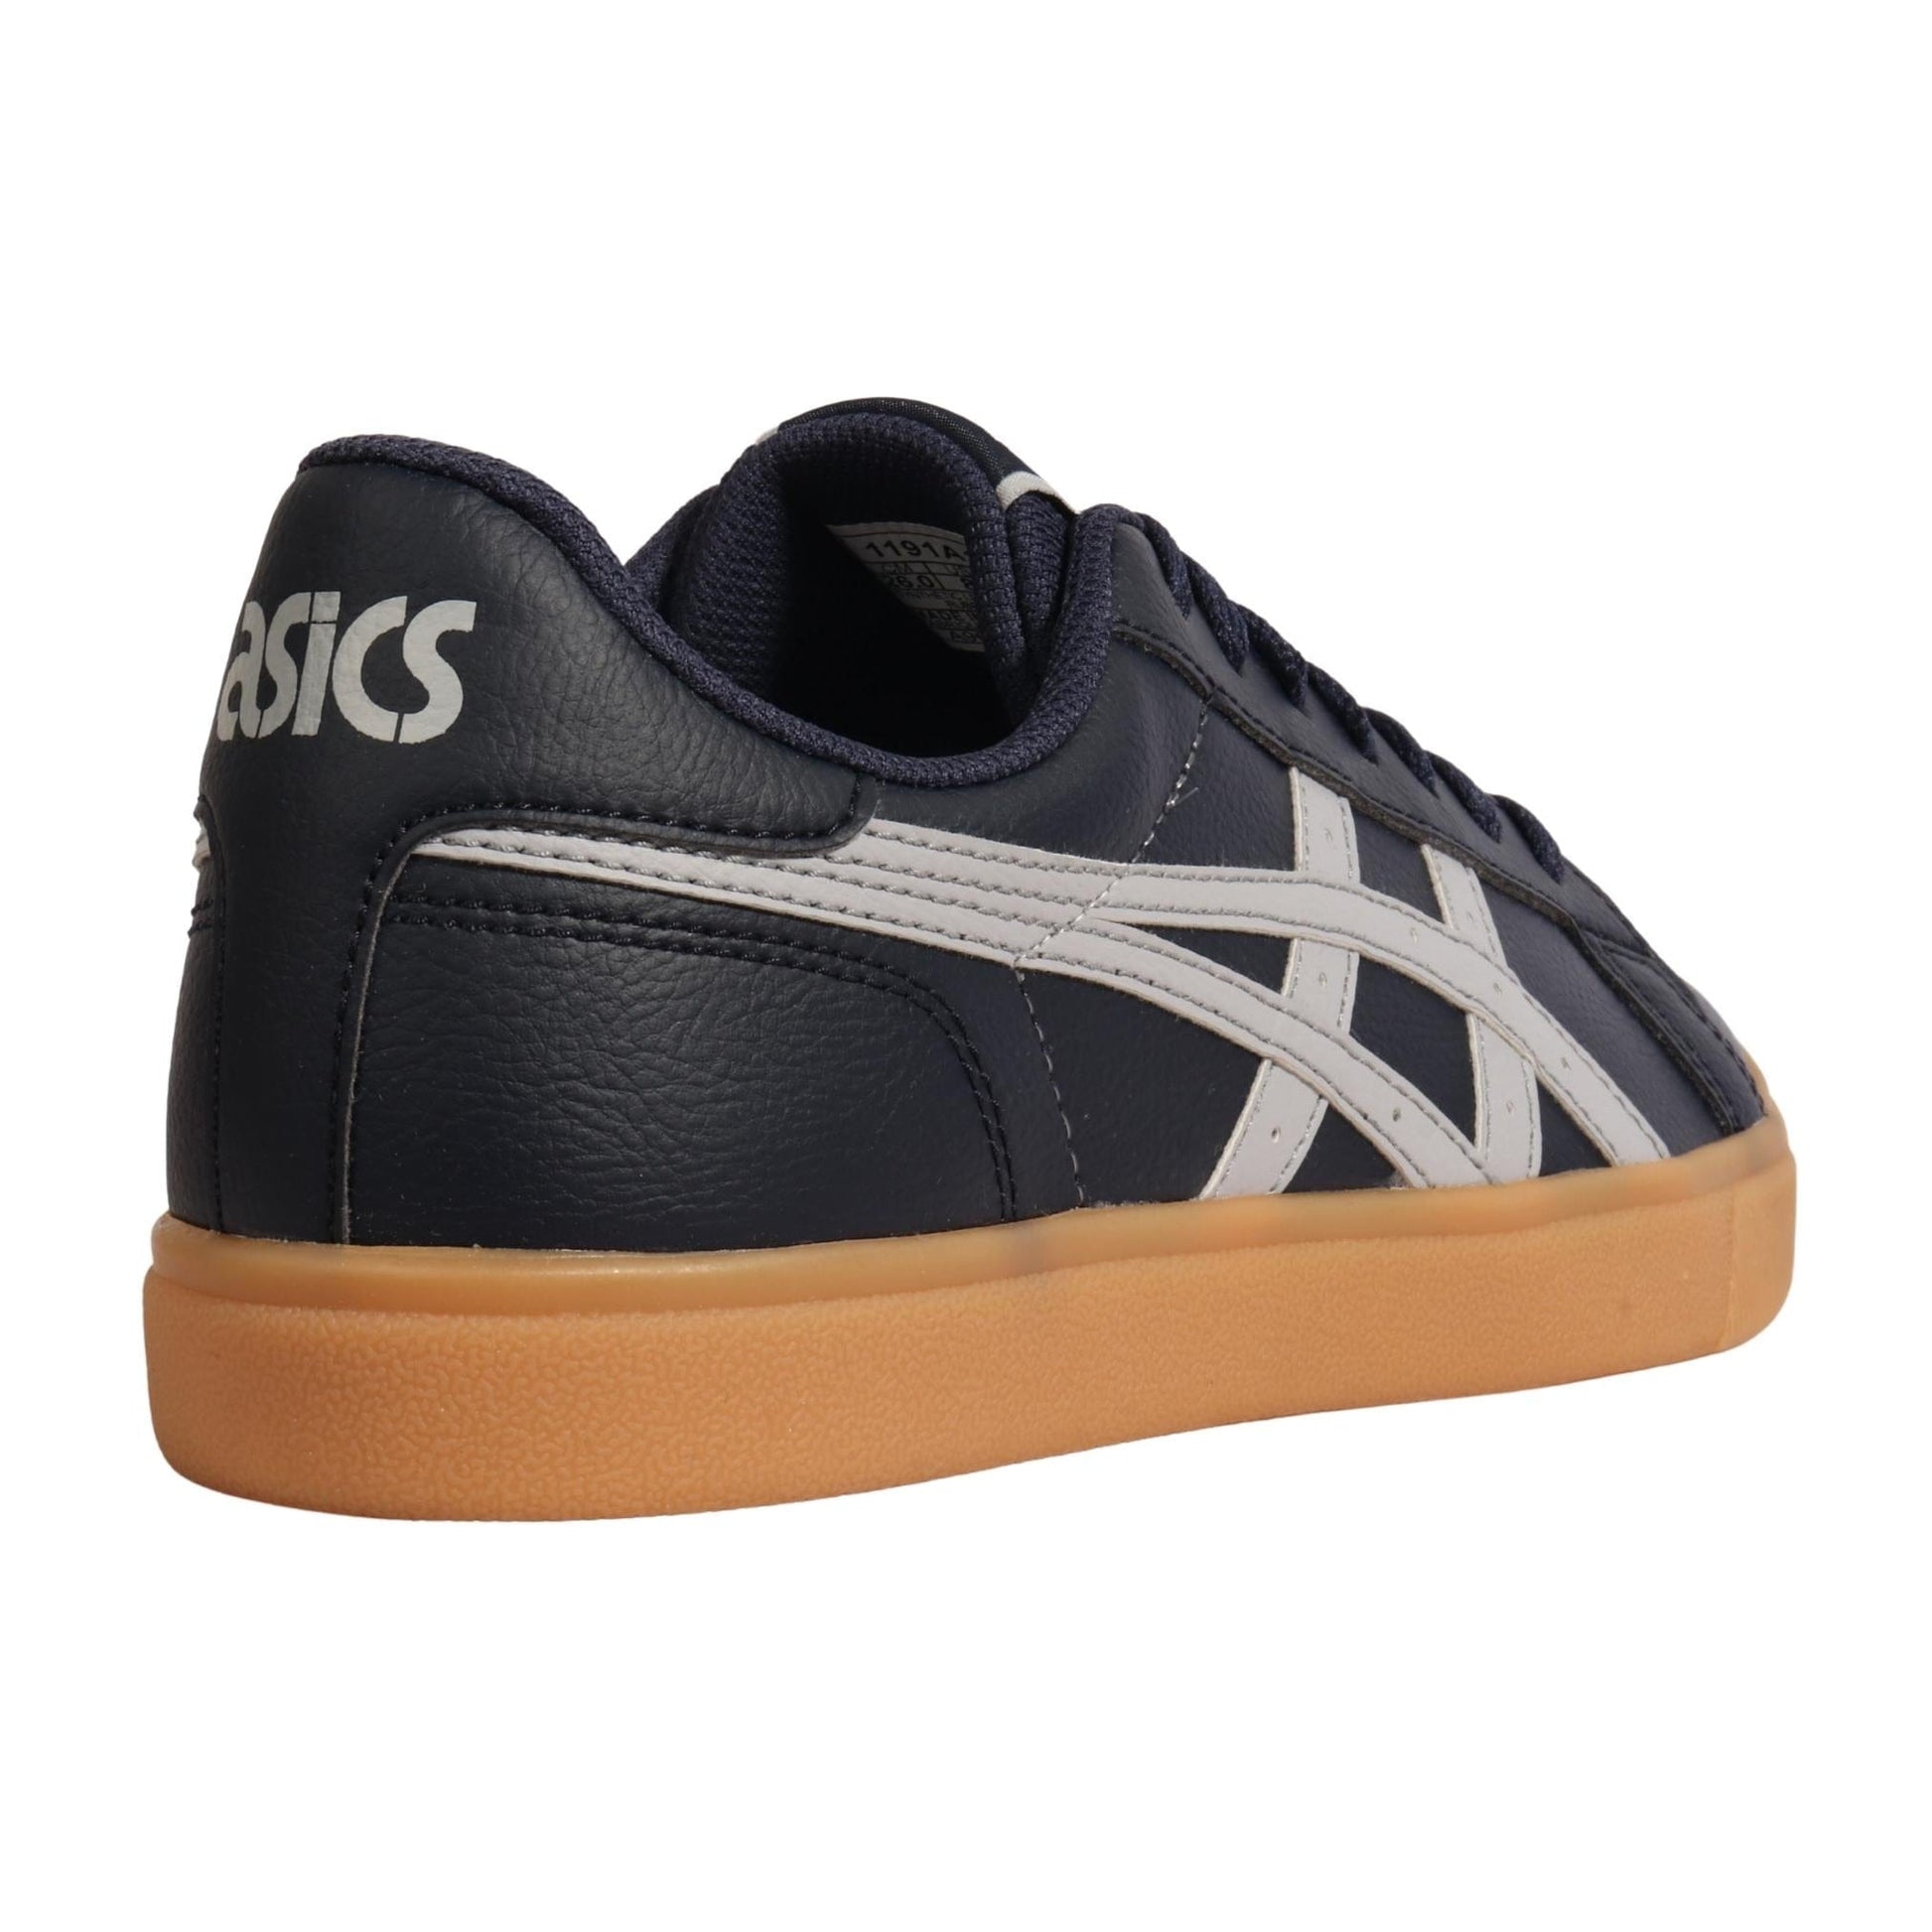 ASICS Athletic Shoes 41.5 / Navy ASICS - Tiger  Classic CT Shoes